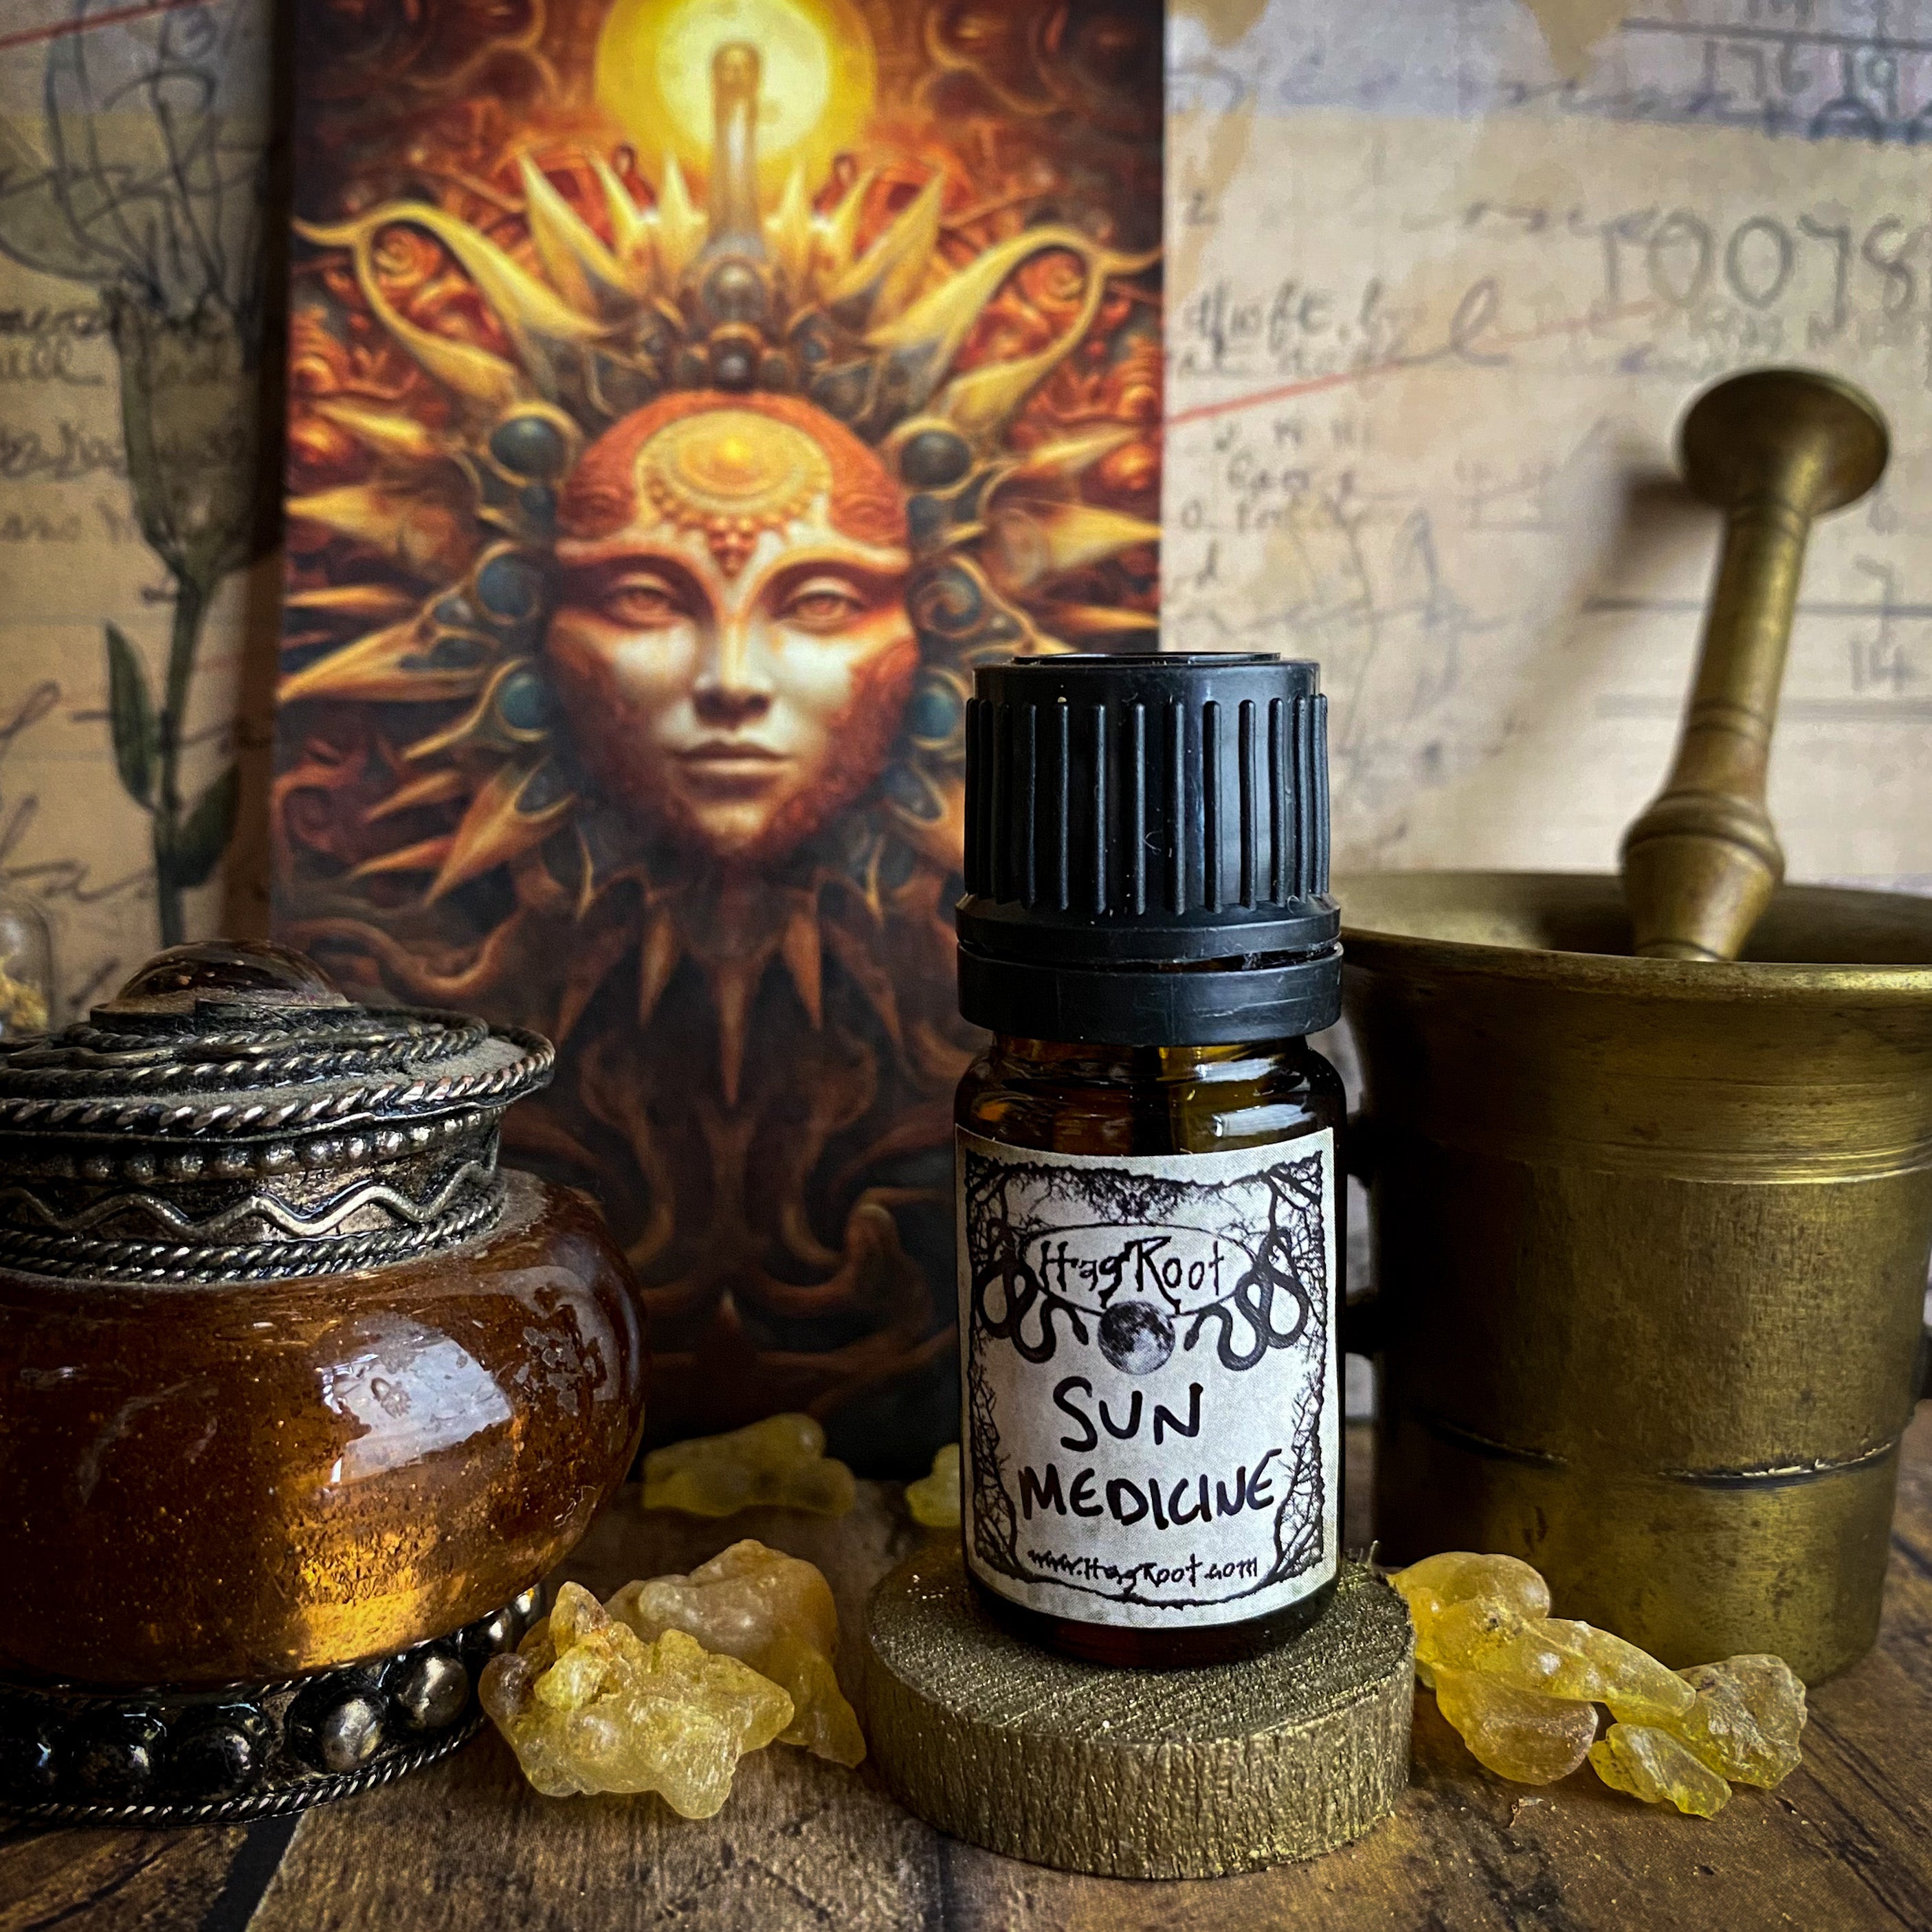 SUN MEDICINE-(Toasted Coconut, Amber Rays and Fields of Wildflowers)-Perfume, Cologne, Anointing, Ritual Oil